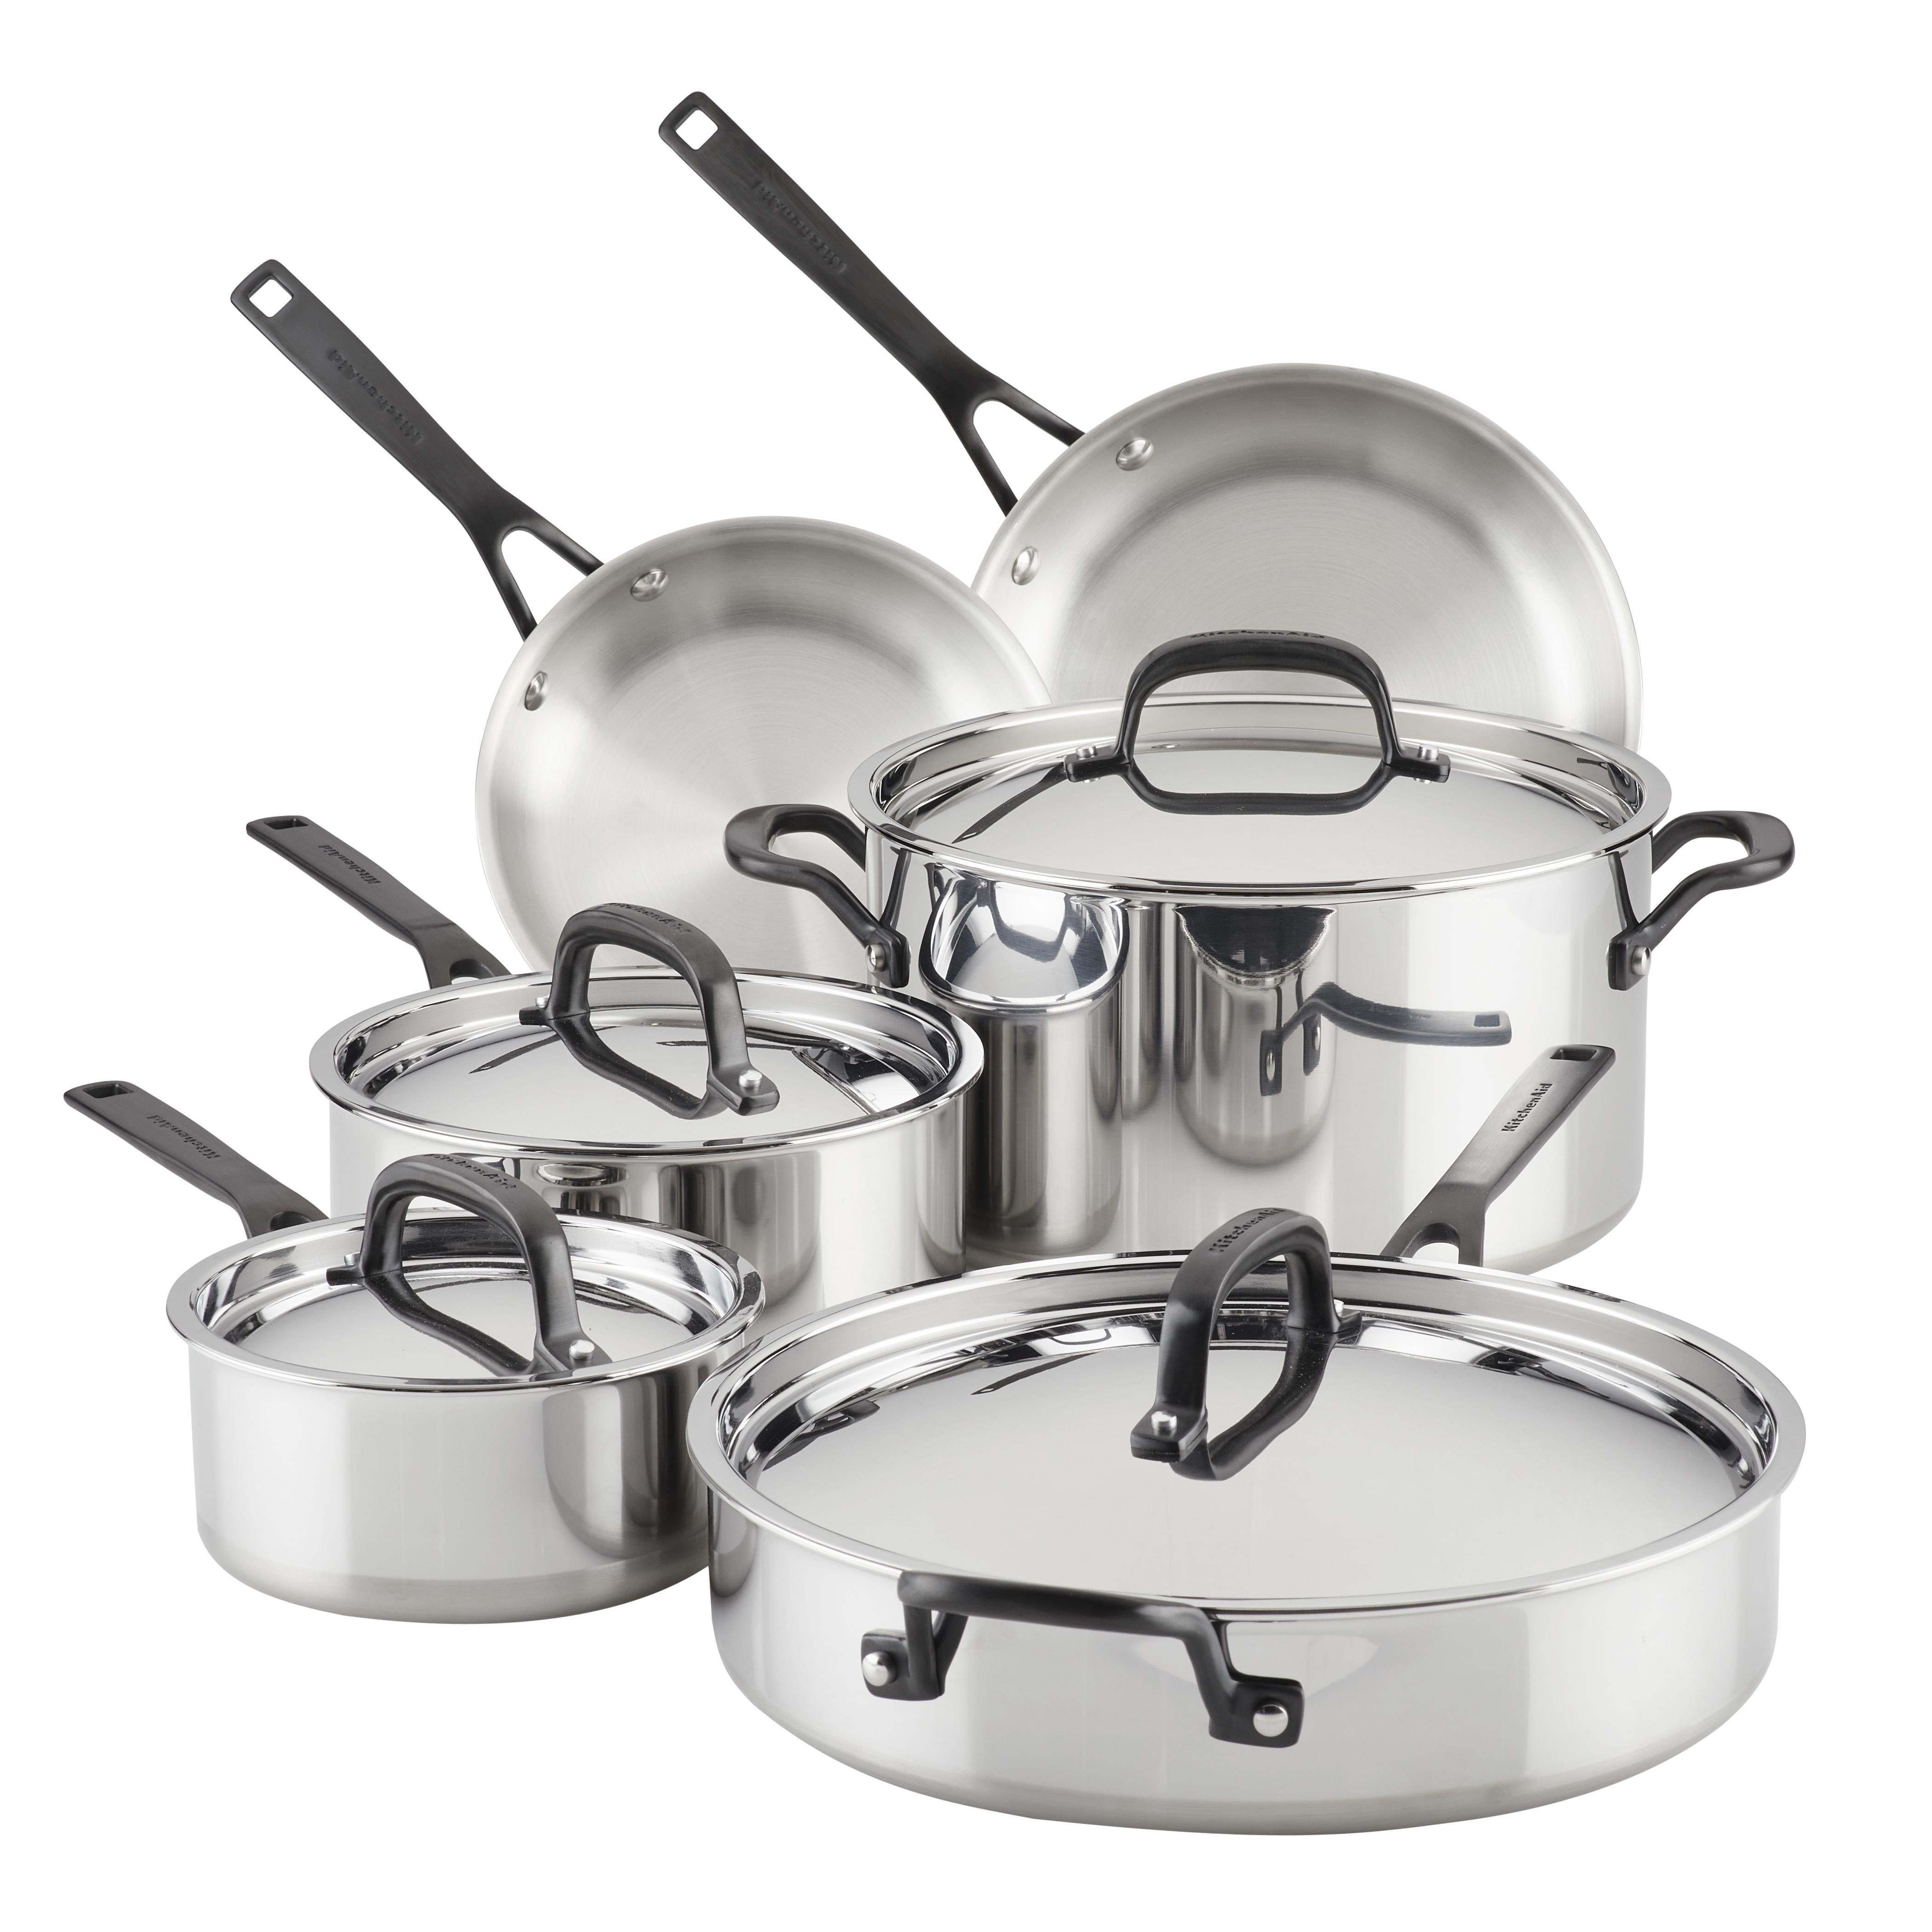 10pc Stainless Steel 5-Ply Clad Cookware Set